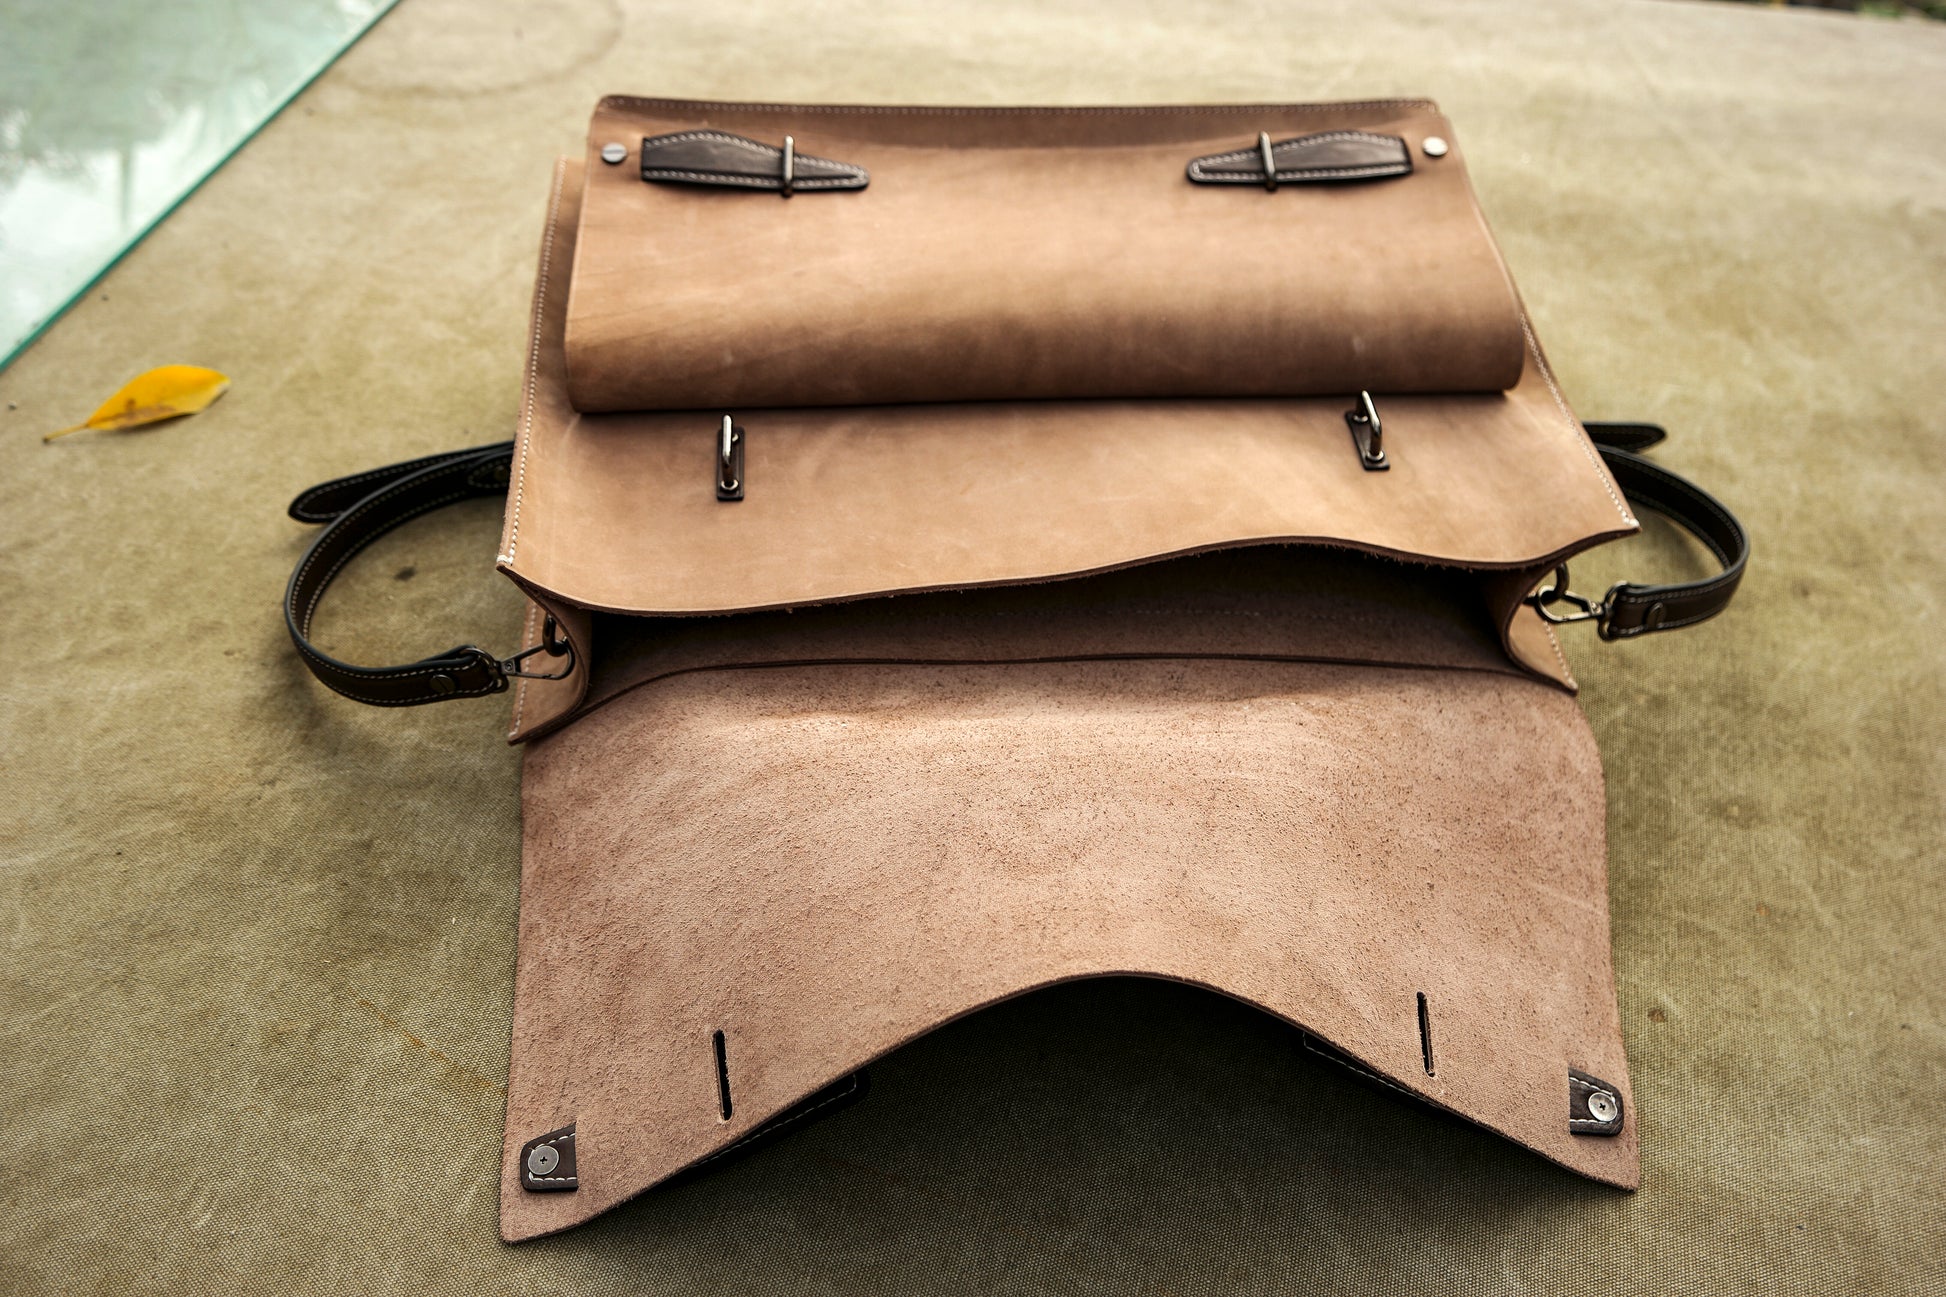 Handmade leather belts, waxed canvas and leather Backpacks, Bushcraft Anoraks, Outdoor coats, Bushcraft vest, forest types, vintage backpacks,Laptop bag, briefcase, inner bag, handbag, wallet,Luggage bags, suitcases, handbags, and more.